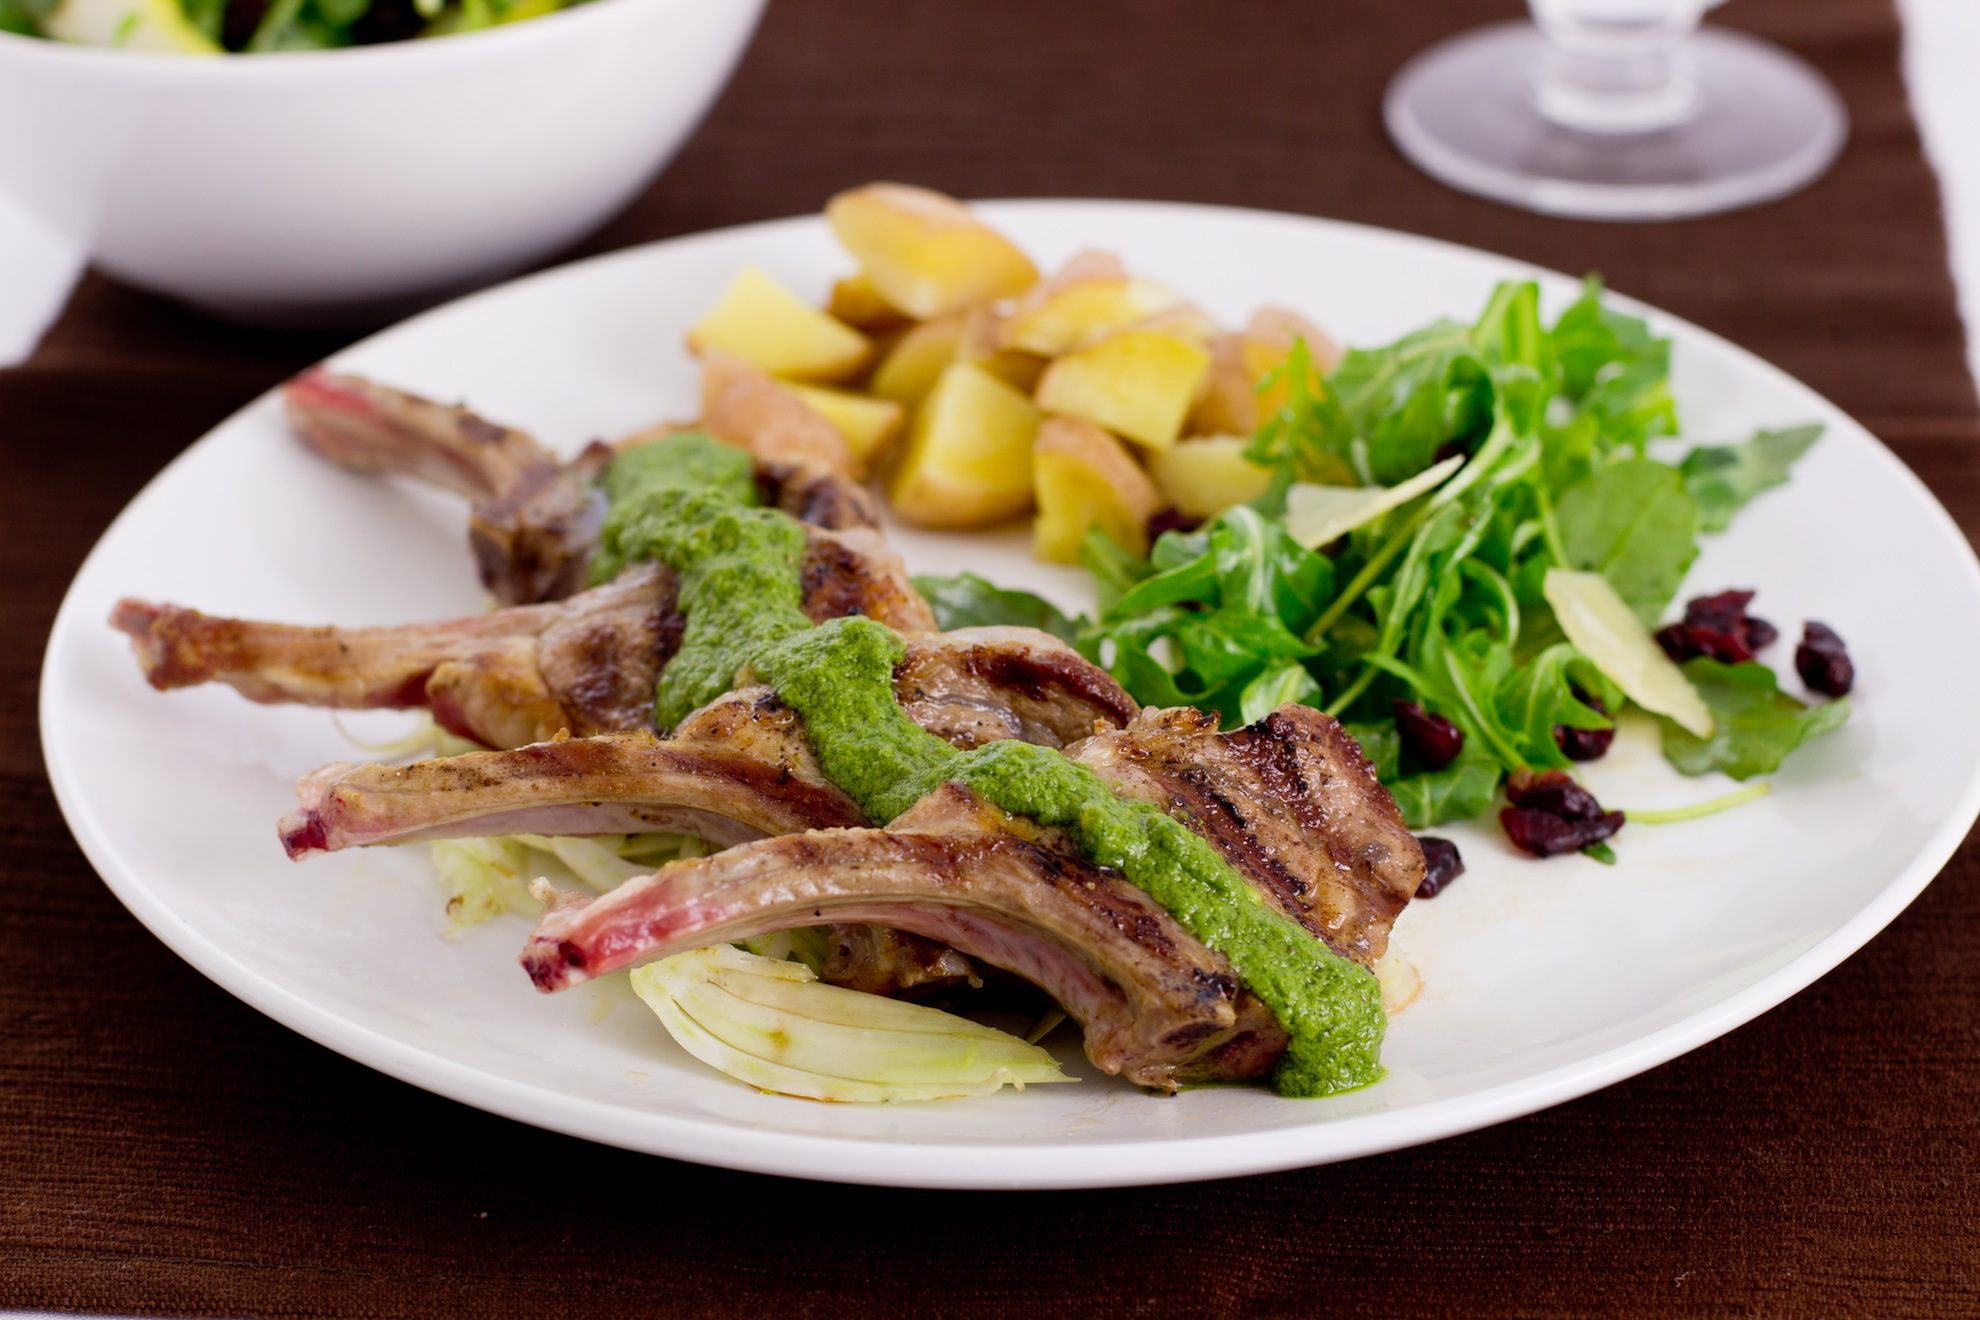 20-minute Meal: Lamb Cutlets with Pesto Sauce Recipe